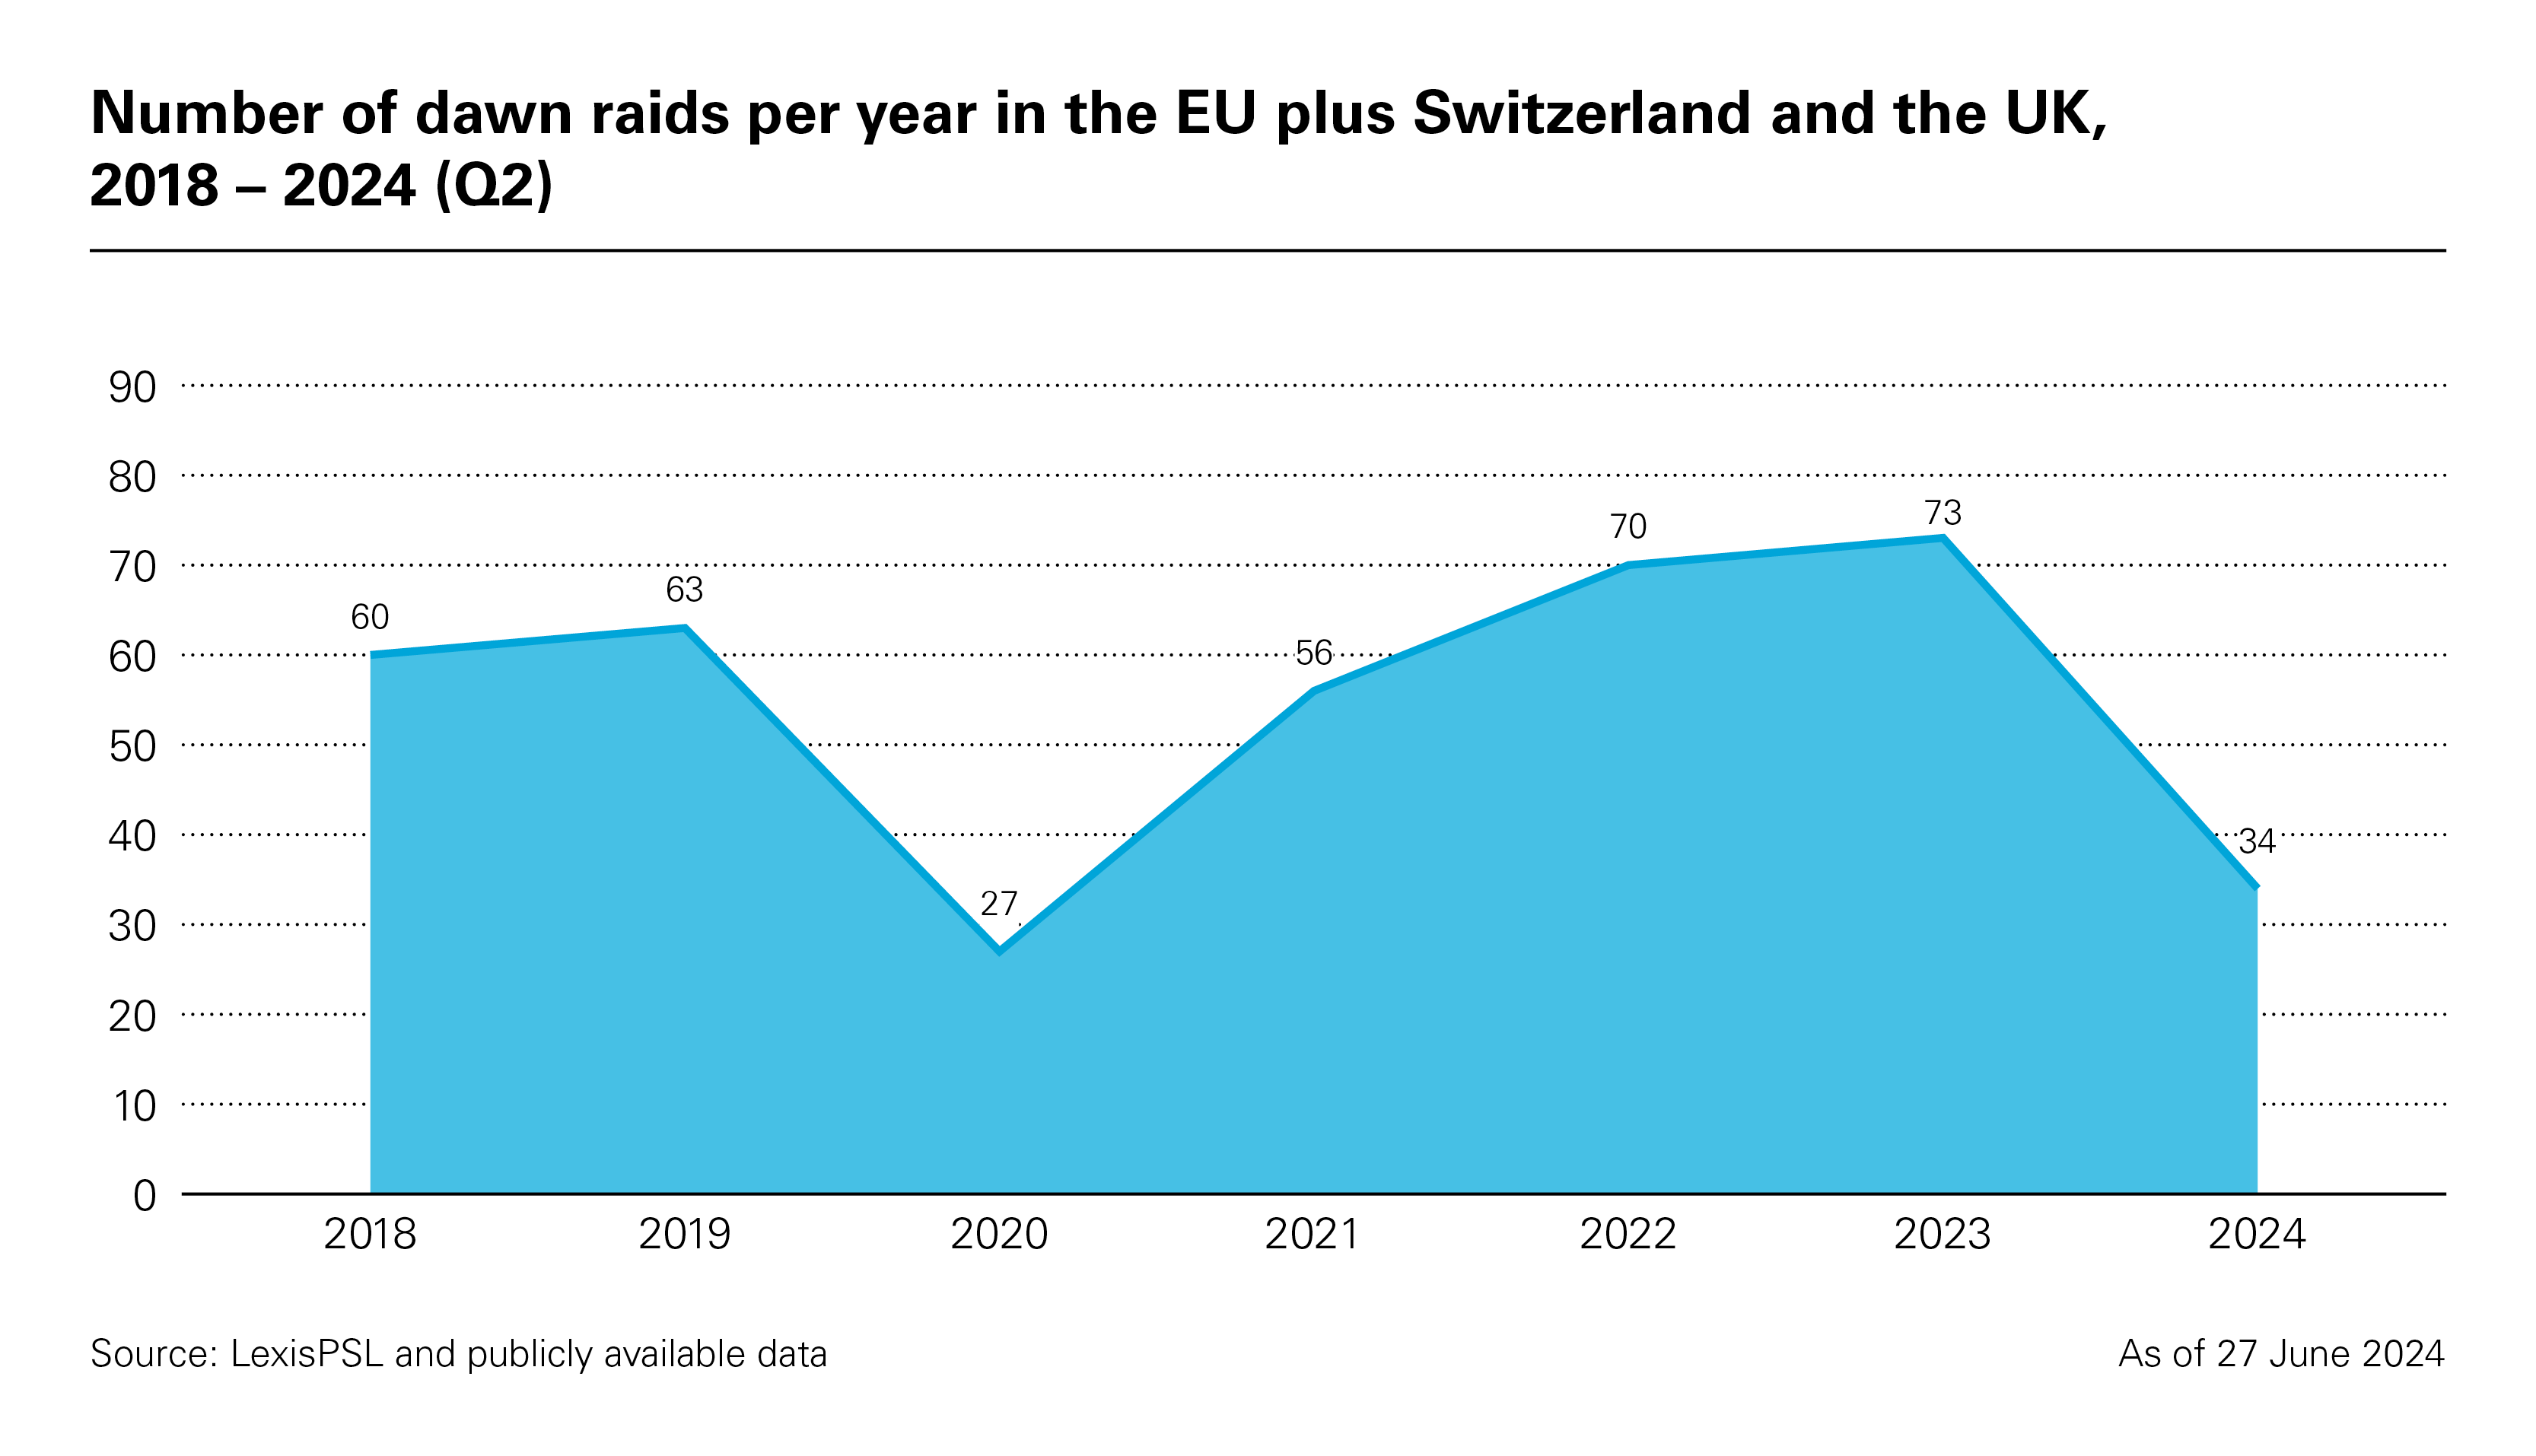 Number of dawn raids per year in the EU plus Switzerland and the UK, 2018 – 2024 (Q2)